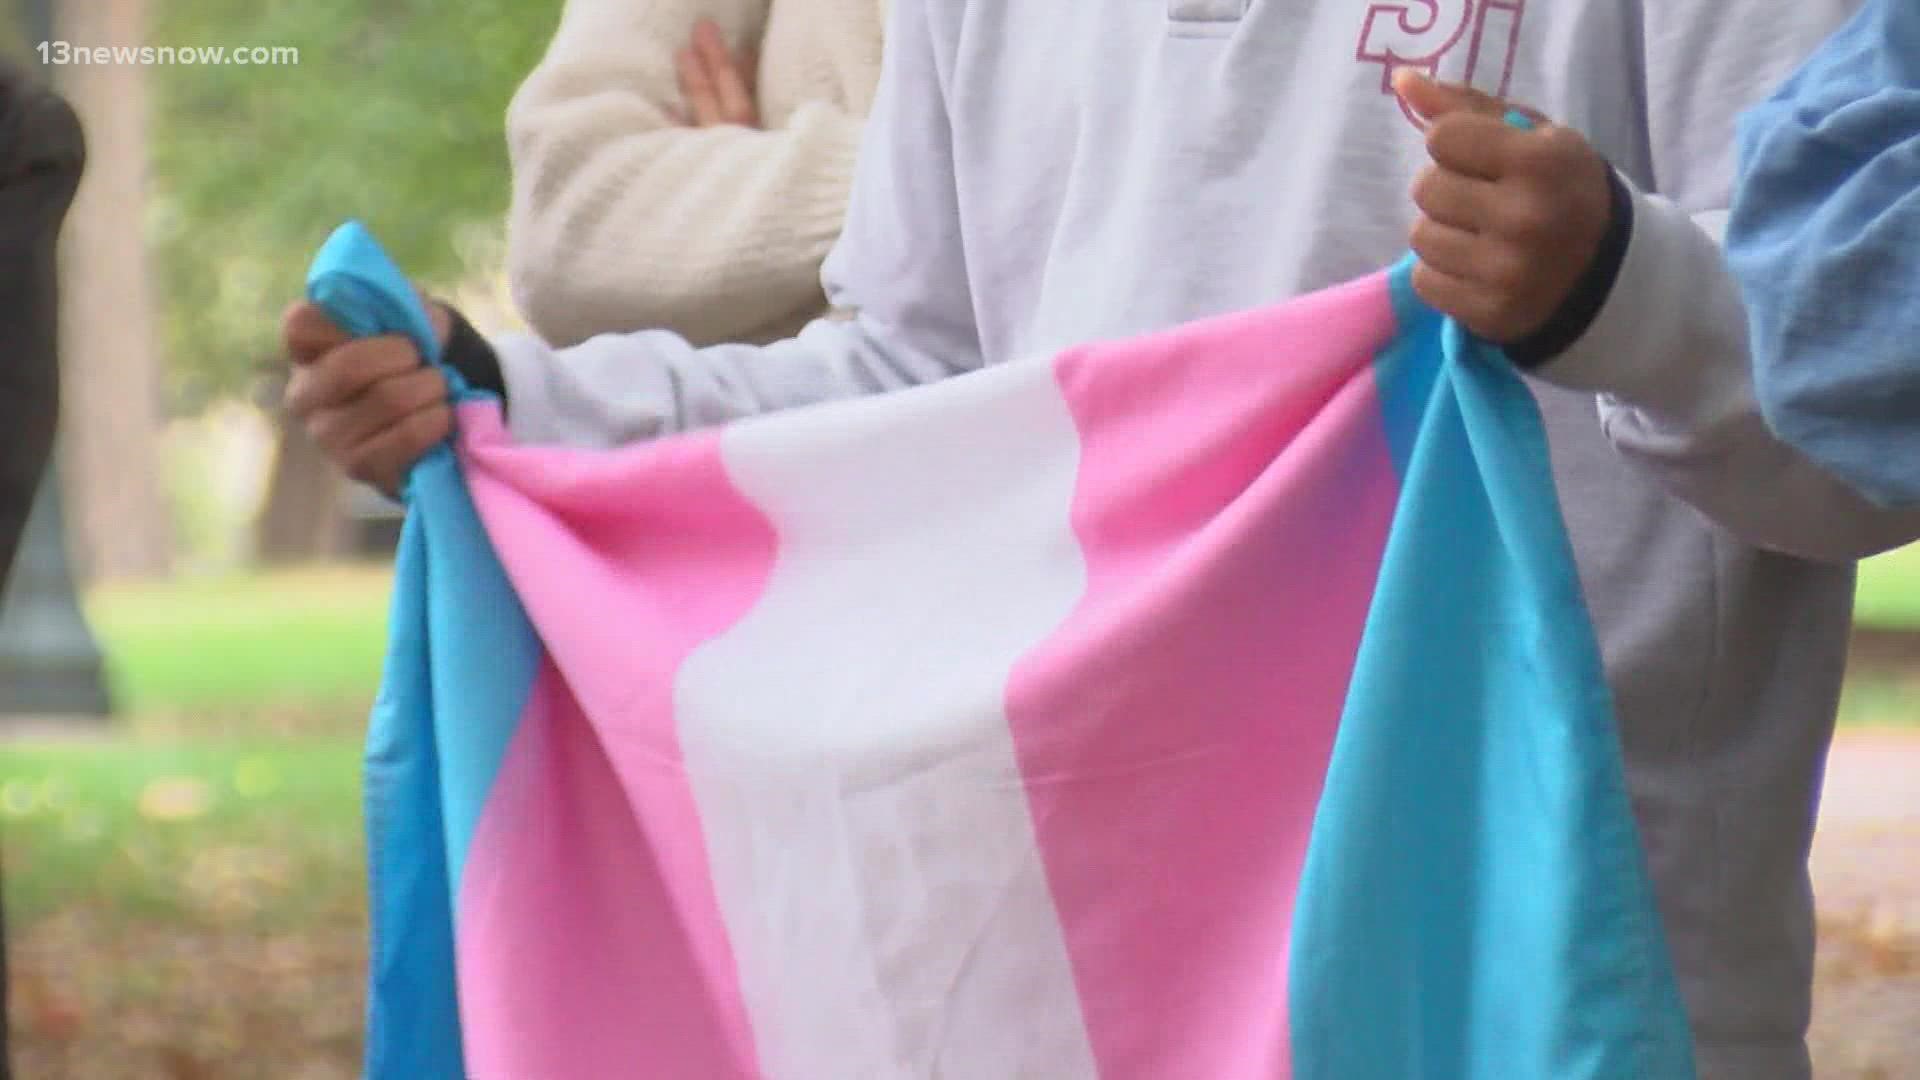 The policies are set to reverse protections for transgender students in schools.